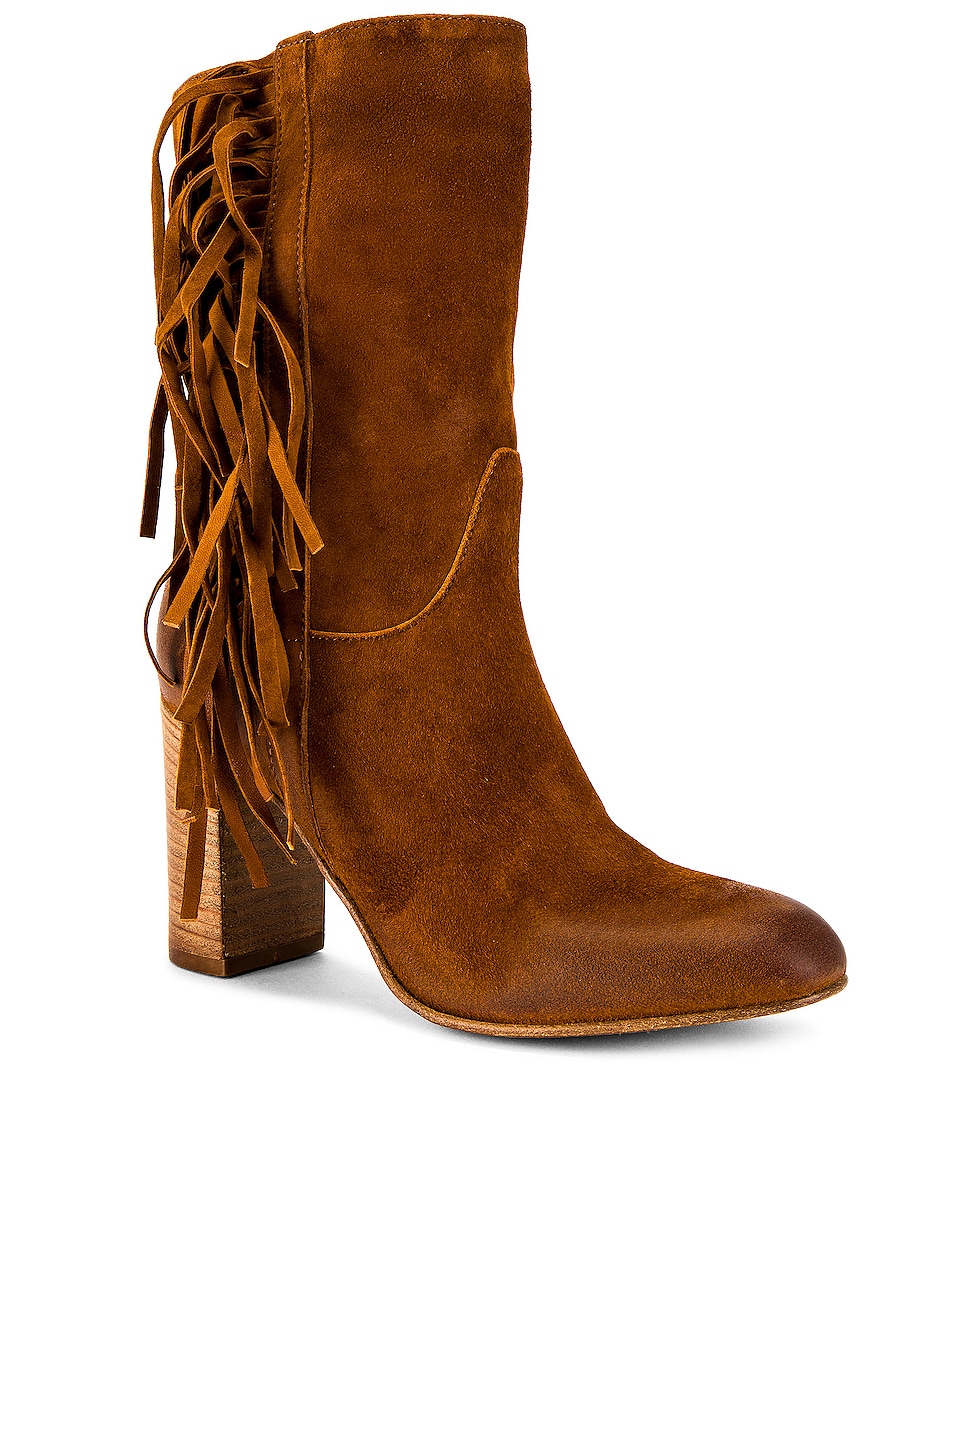 Free People Wild Rose Slouch Boots in Tan Suede | REVOLVE